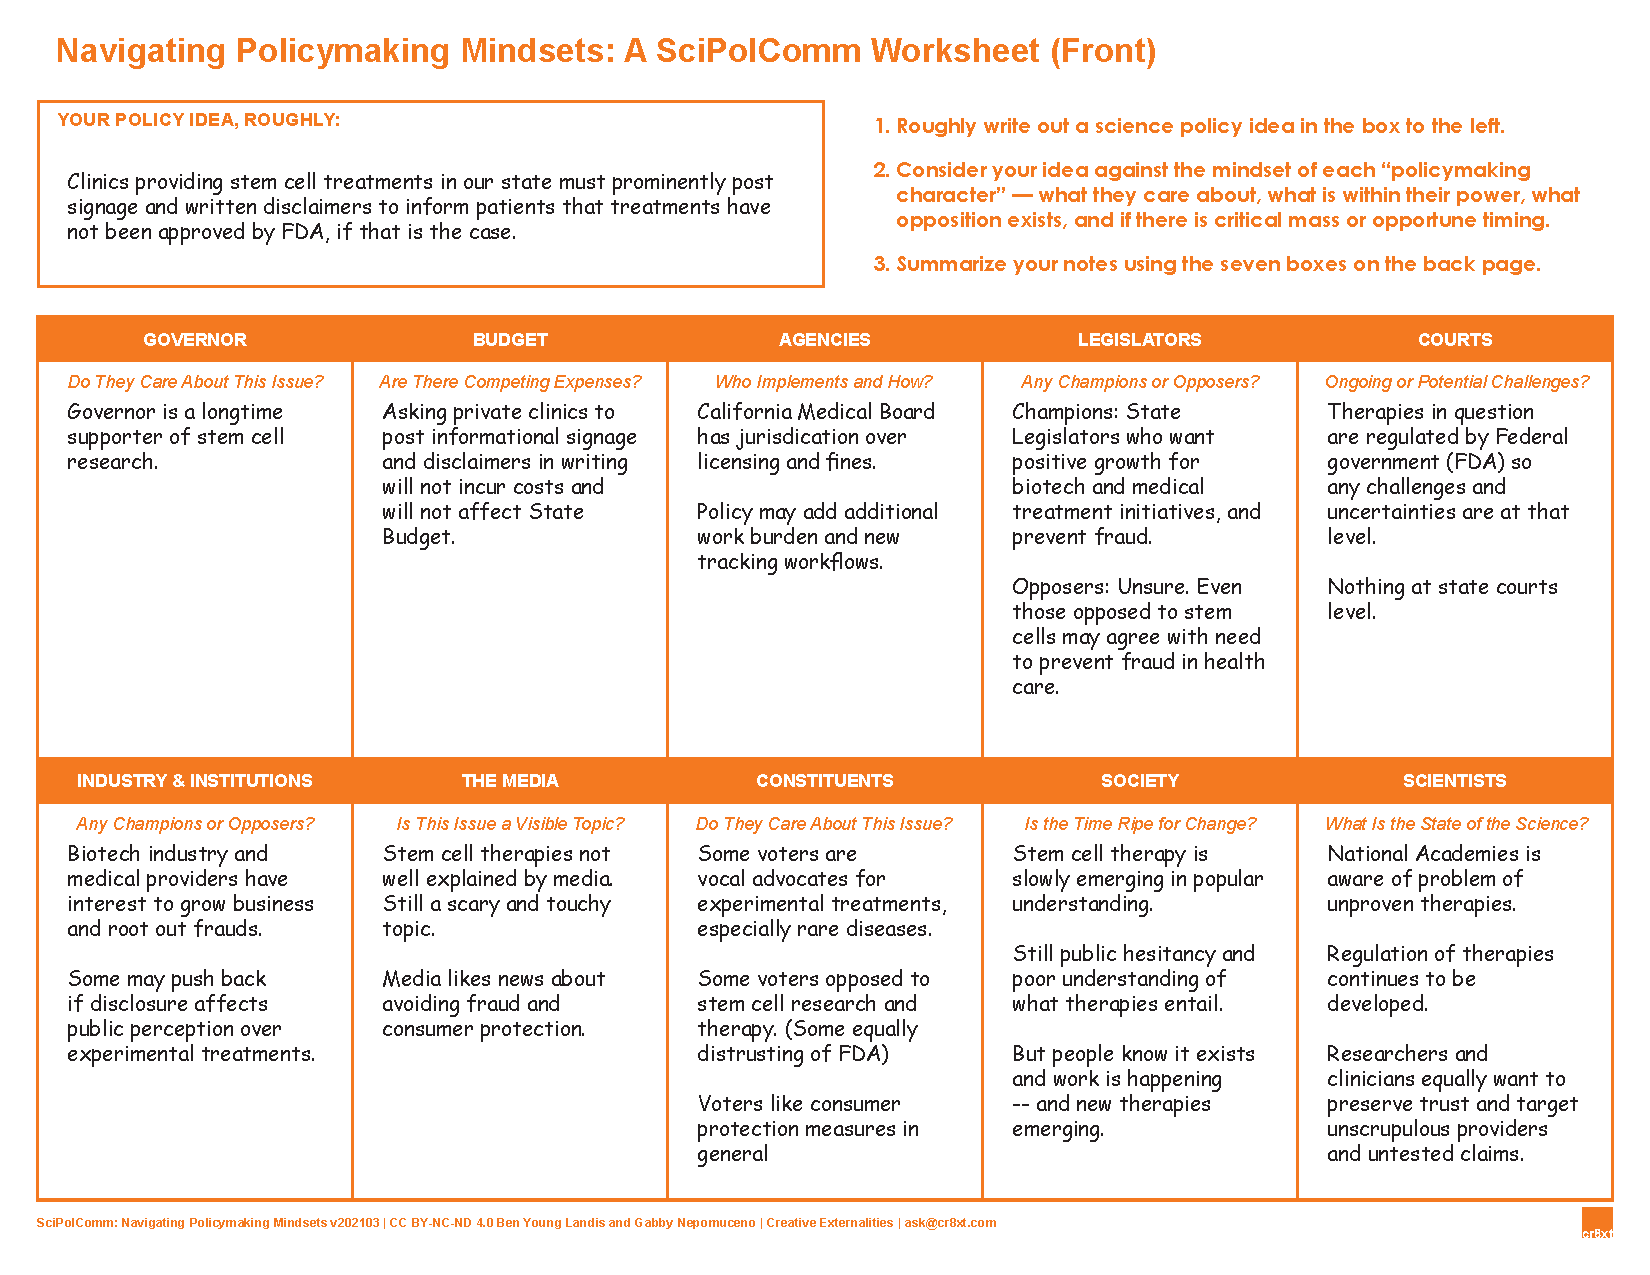 A screenshot of the front of the Navigating Policymaker Mindsets worksheet, created by Ben Young Landis and Gabby Nepomuceno. Set up as an opening box asking Your Policy Idea Roughly, then ten boxes over two rows prompting write-in responses related to one of ten policy characters, such as Governor, Budget, Agencies. The workshsheet is in orange ink on white paper, and this specific image depicts the Stem Cell Therapy example PDF.